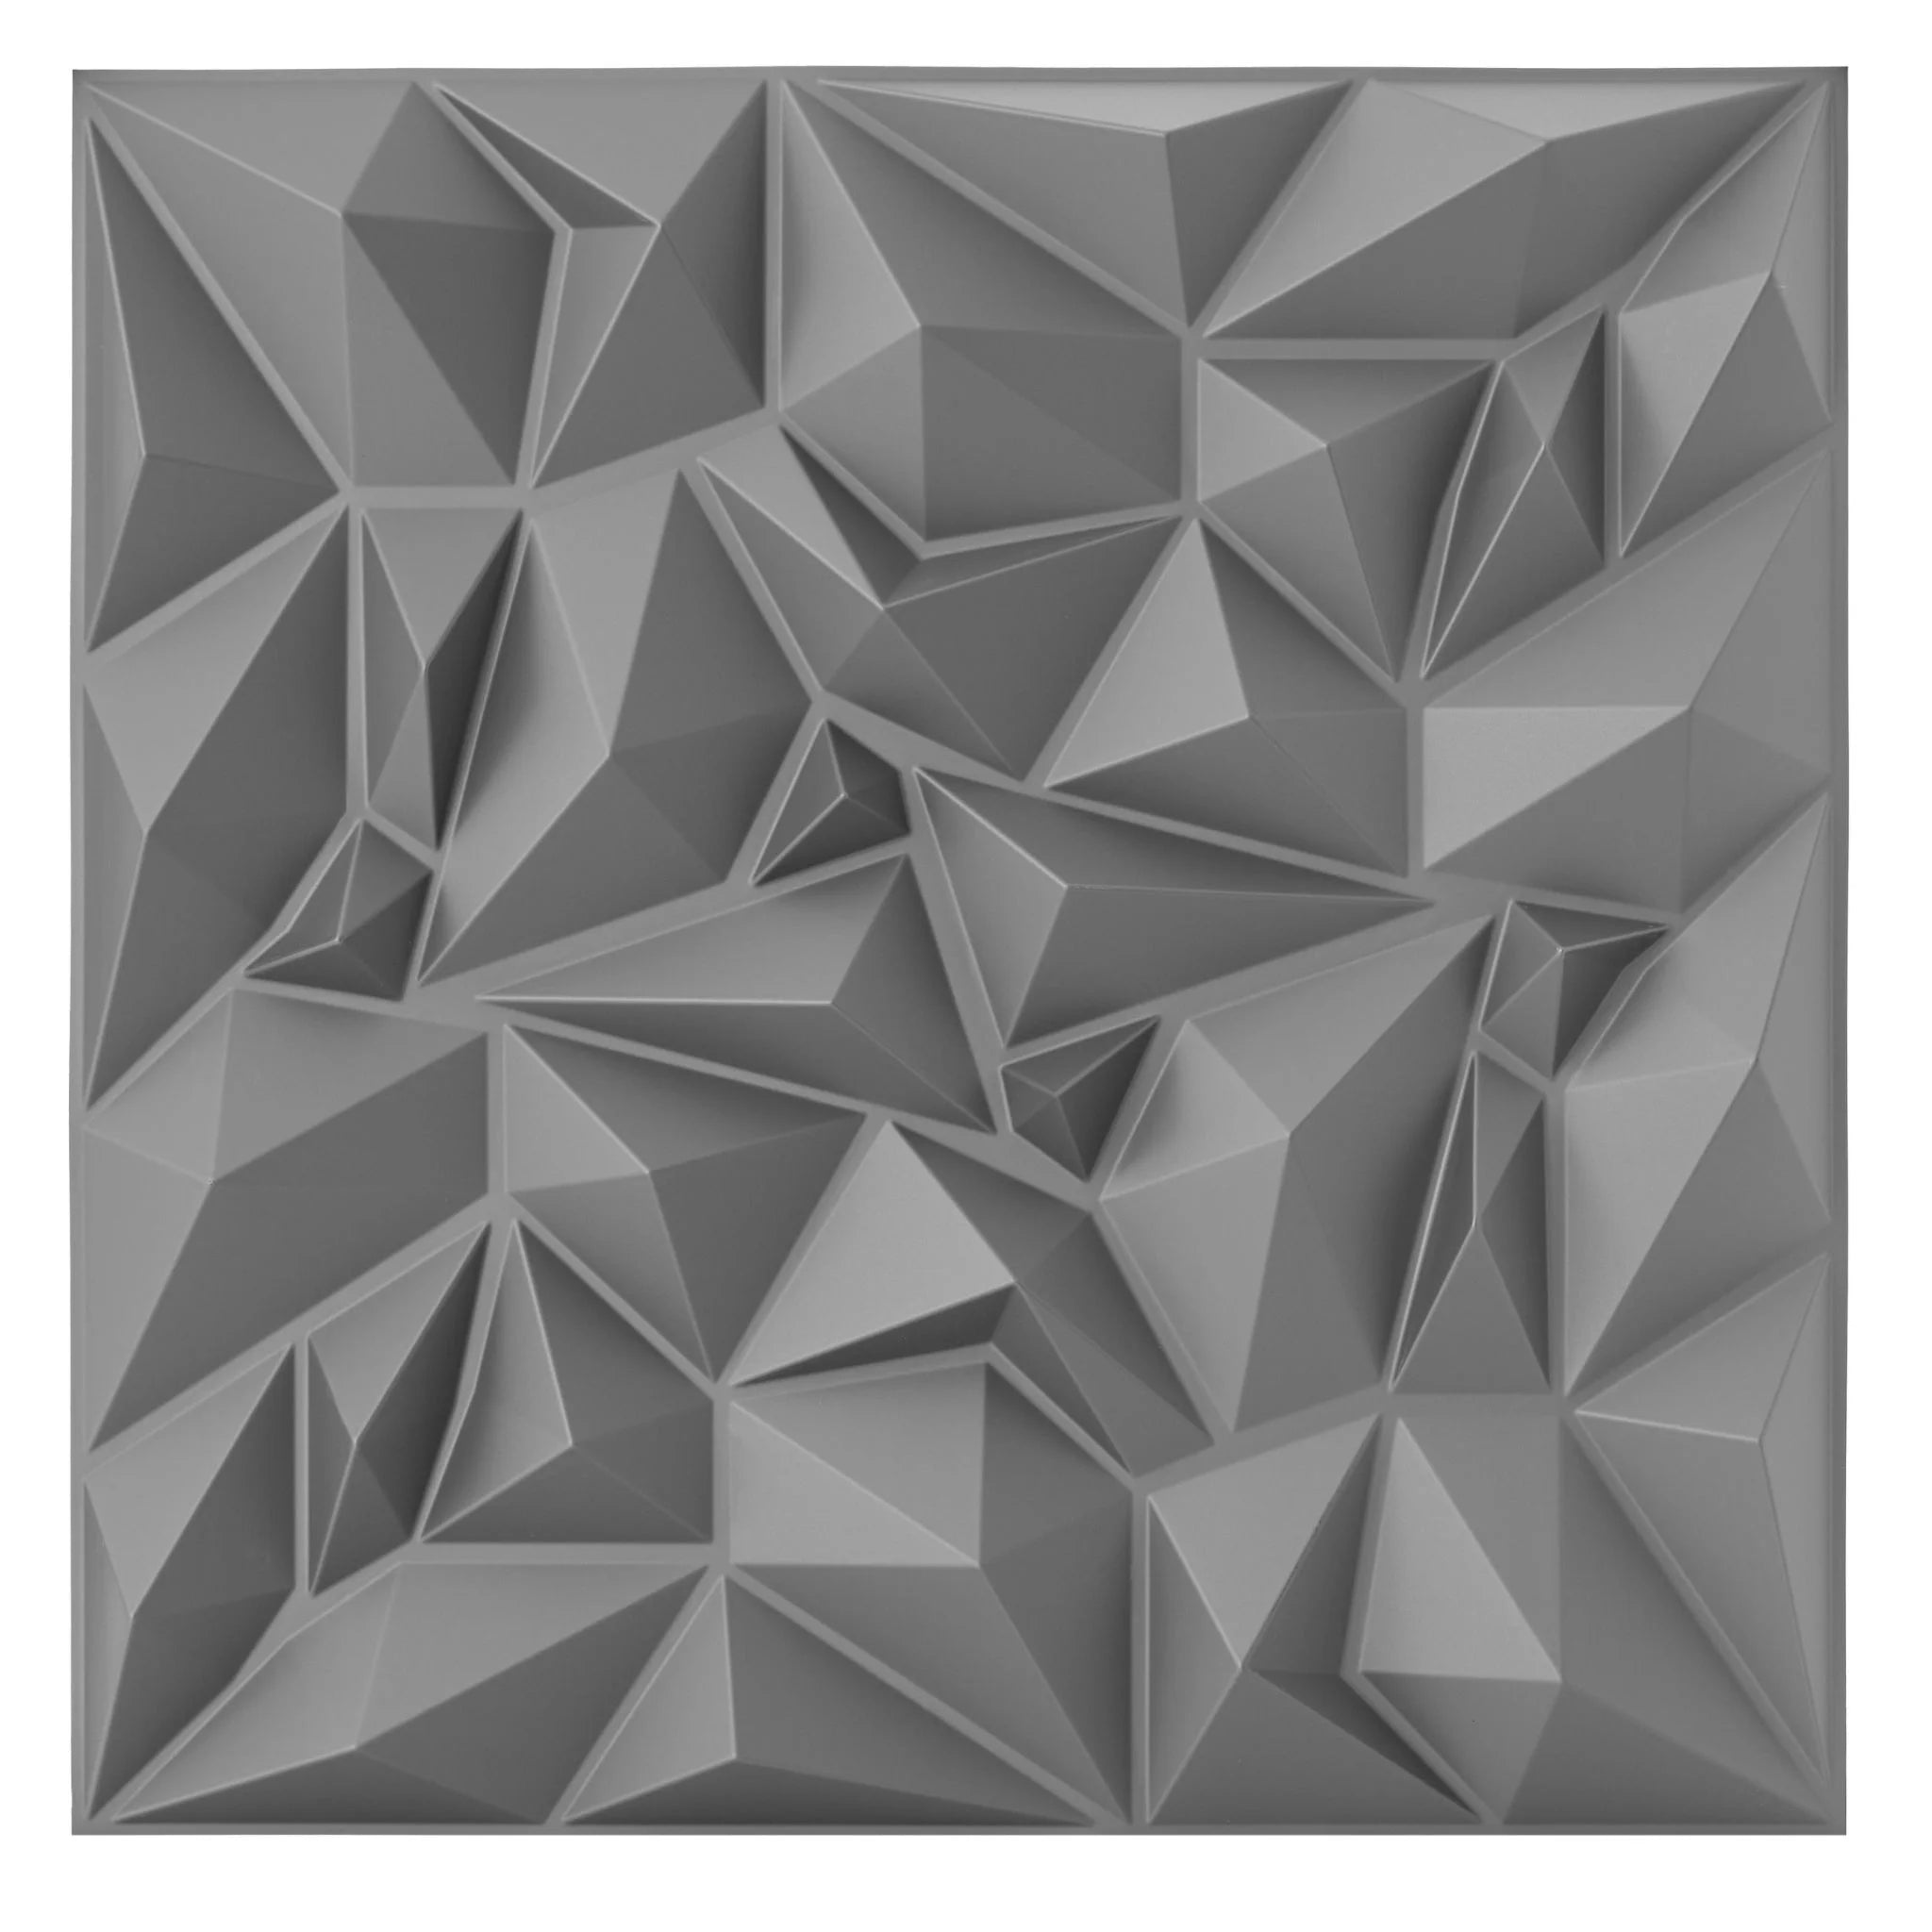 Silver PVC wall panel with geometric patterns, close-up view